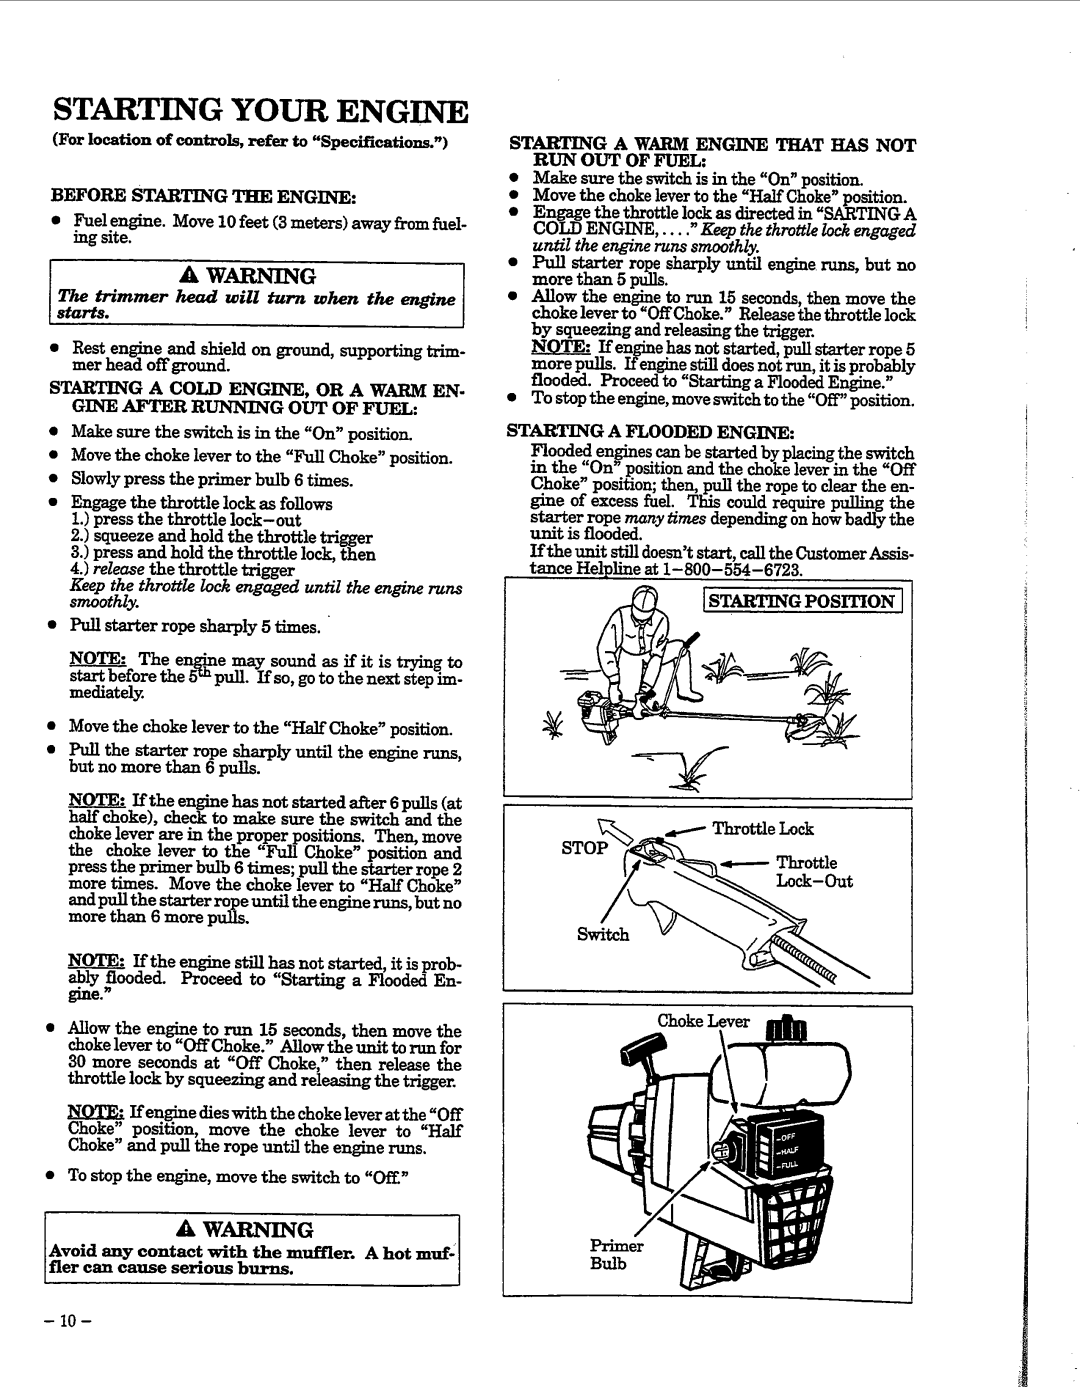 Weed Eater TBC 57 manual 